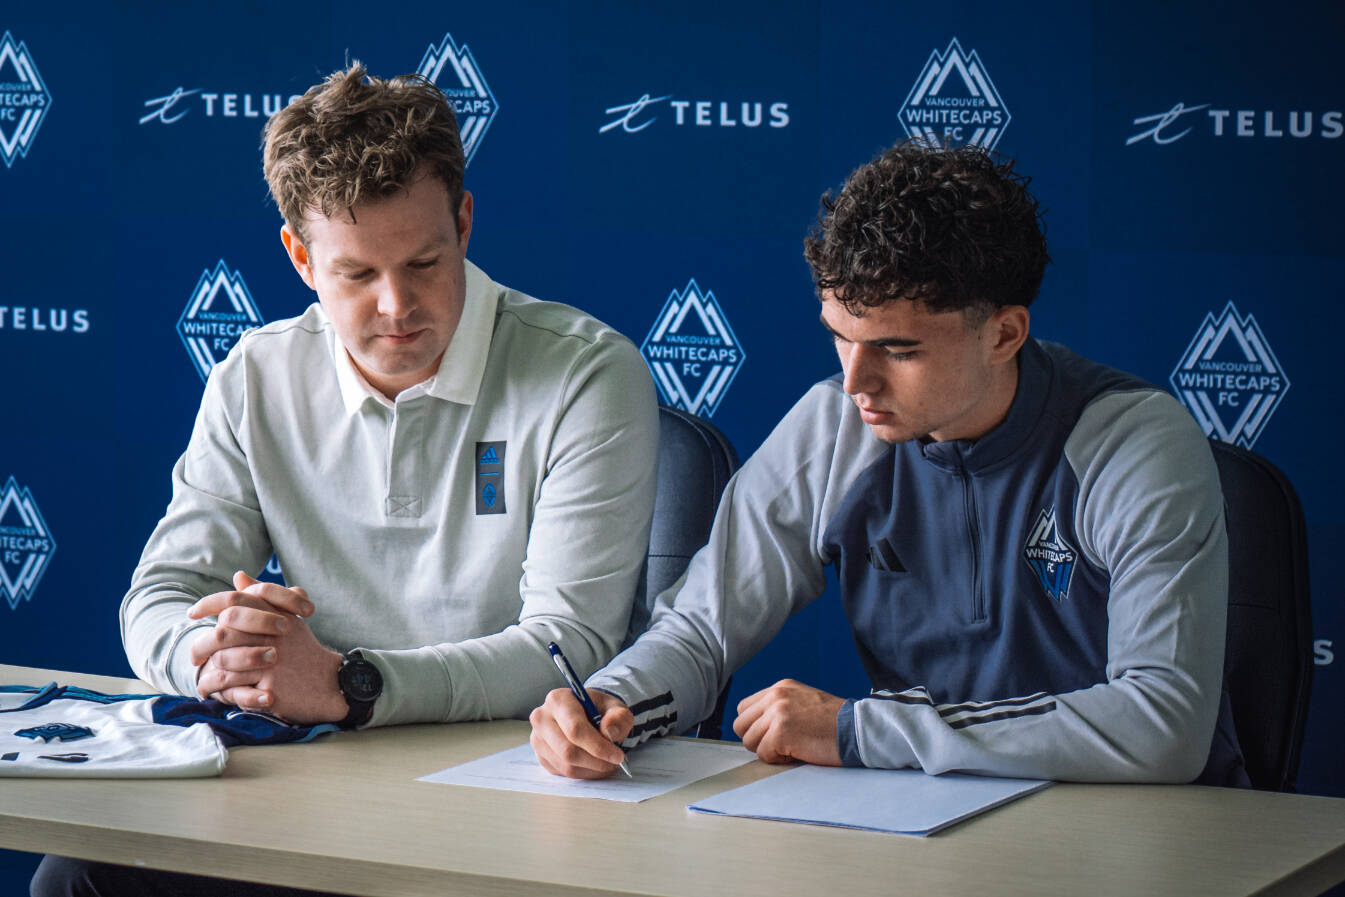 Seventeen-year-old Comox soccer sensation Liam Mackenzie signs a professional contract with the Vancouver Whitecaps as Quinn Thompson, Whitecaps FC senior director of player personnel, first team operations looks on. Photo by Noah Celebiler/Vancouver Whitecaps FC